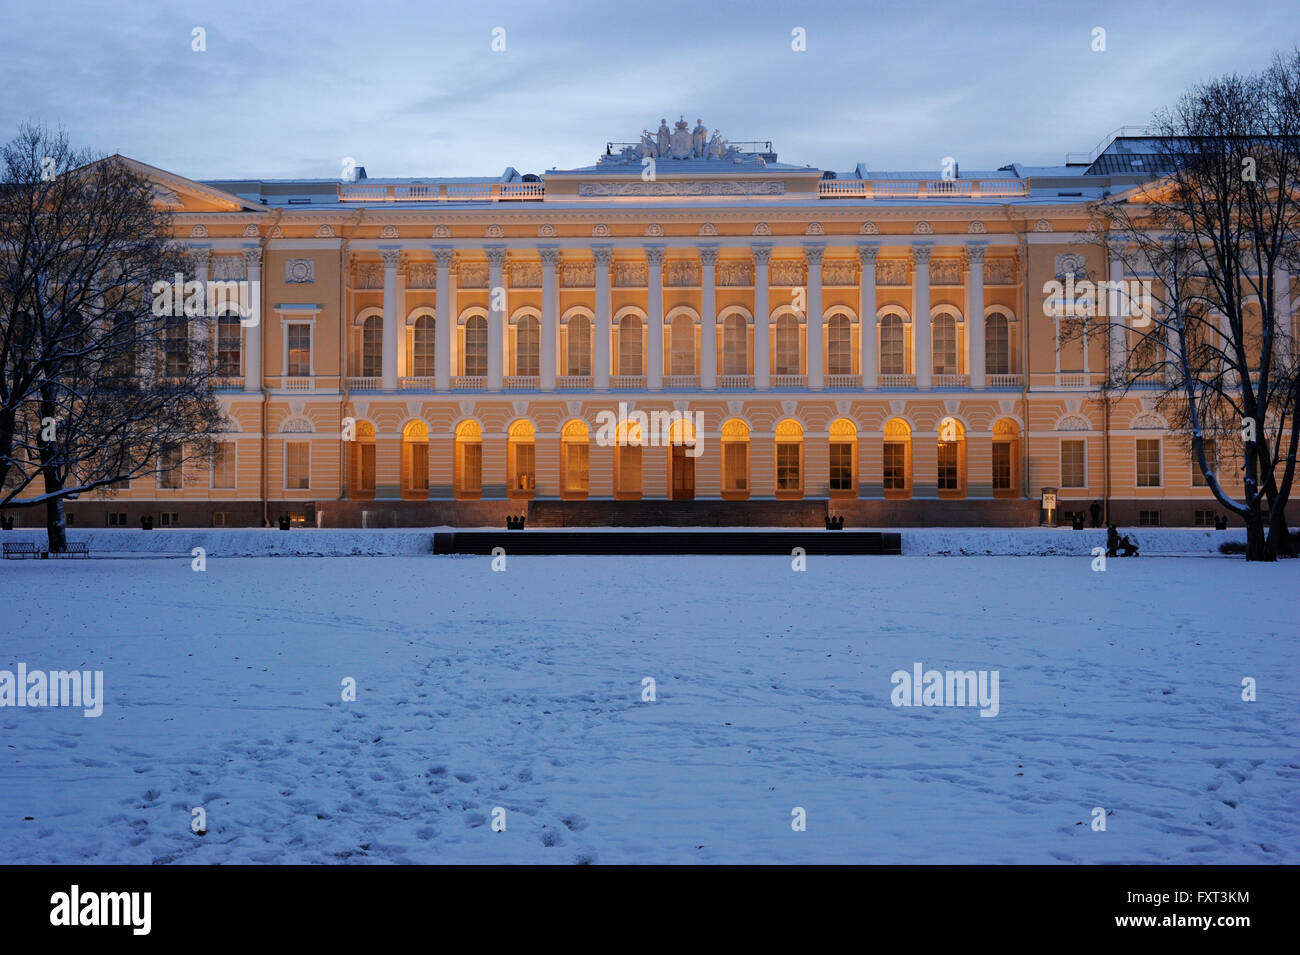 Russia. Saint Petersburg. State Russian Museum (Russian Museum of his Imperial Majesty Alexander III) in Mikhailovsky Palace. Neoclassical style, erected in 1819-25 and design by Carlo Rossi (1775-1849). Winter landscape. Stock Photo